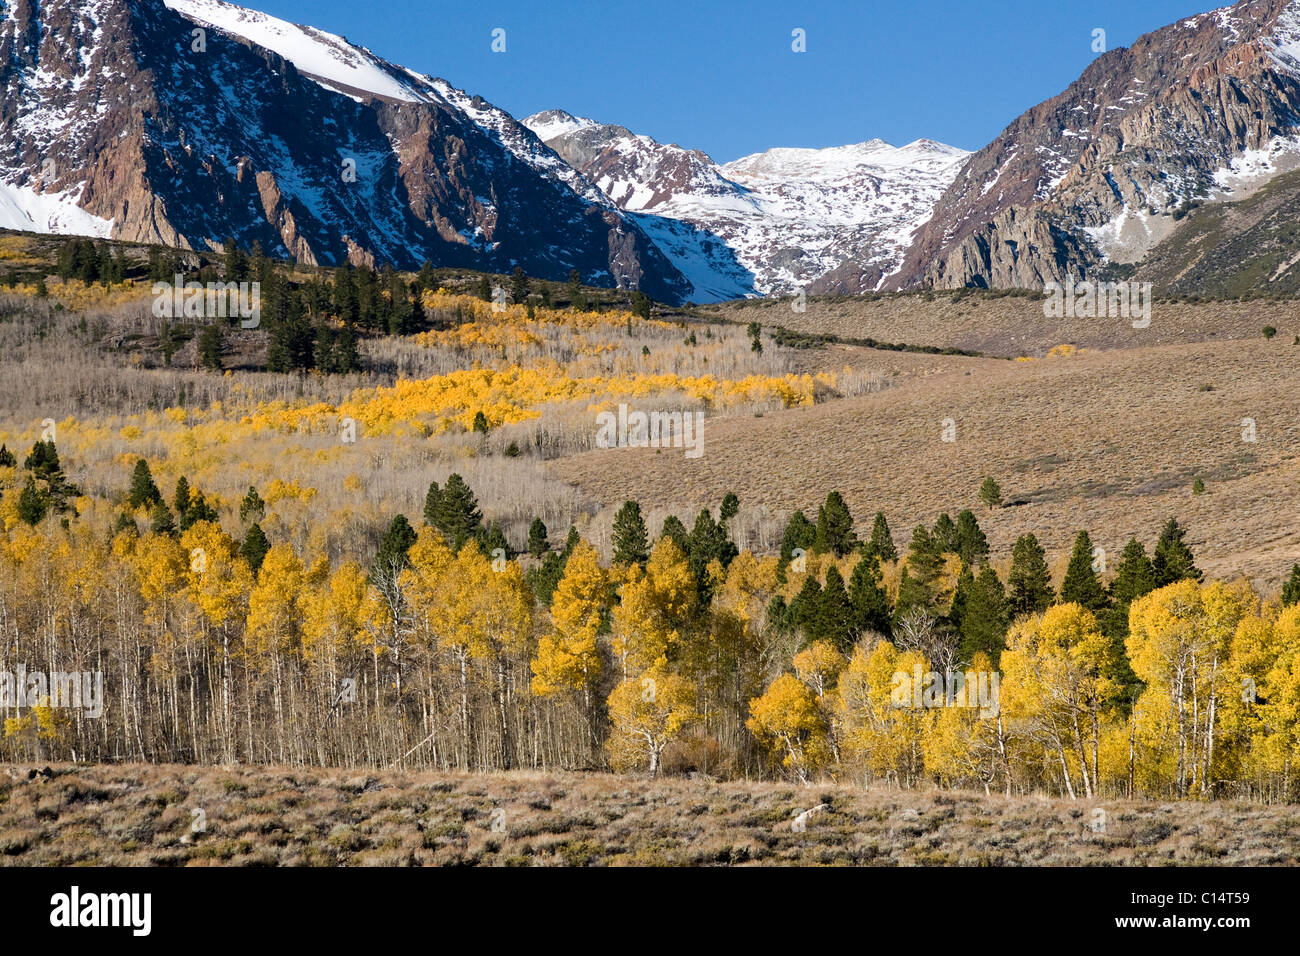 A landscape with autumn leaves, a snow covered mountain, and aspen trees in the Sierra mountains near Lee Vining, California Stock Photo